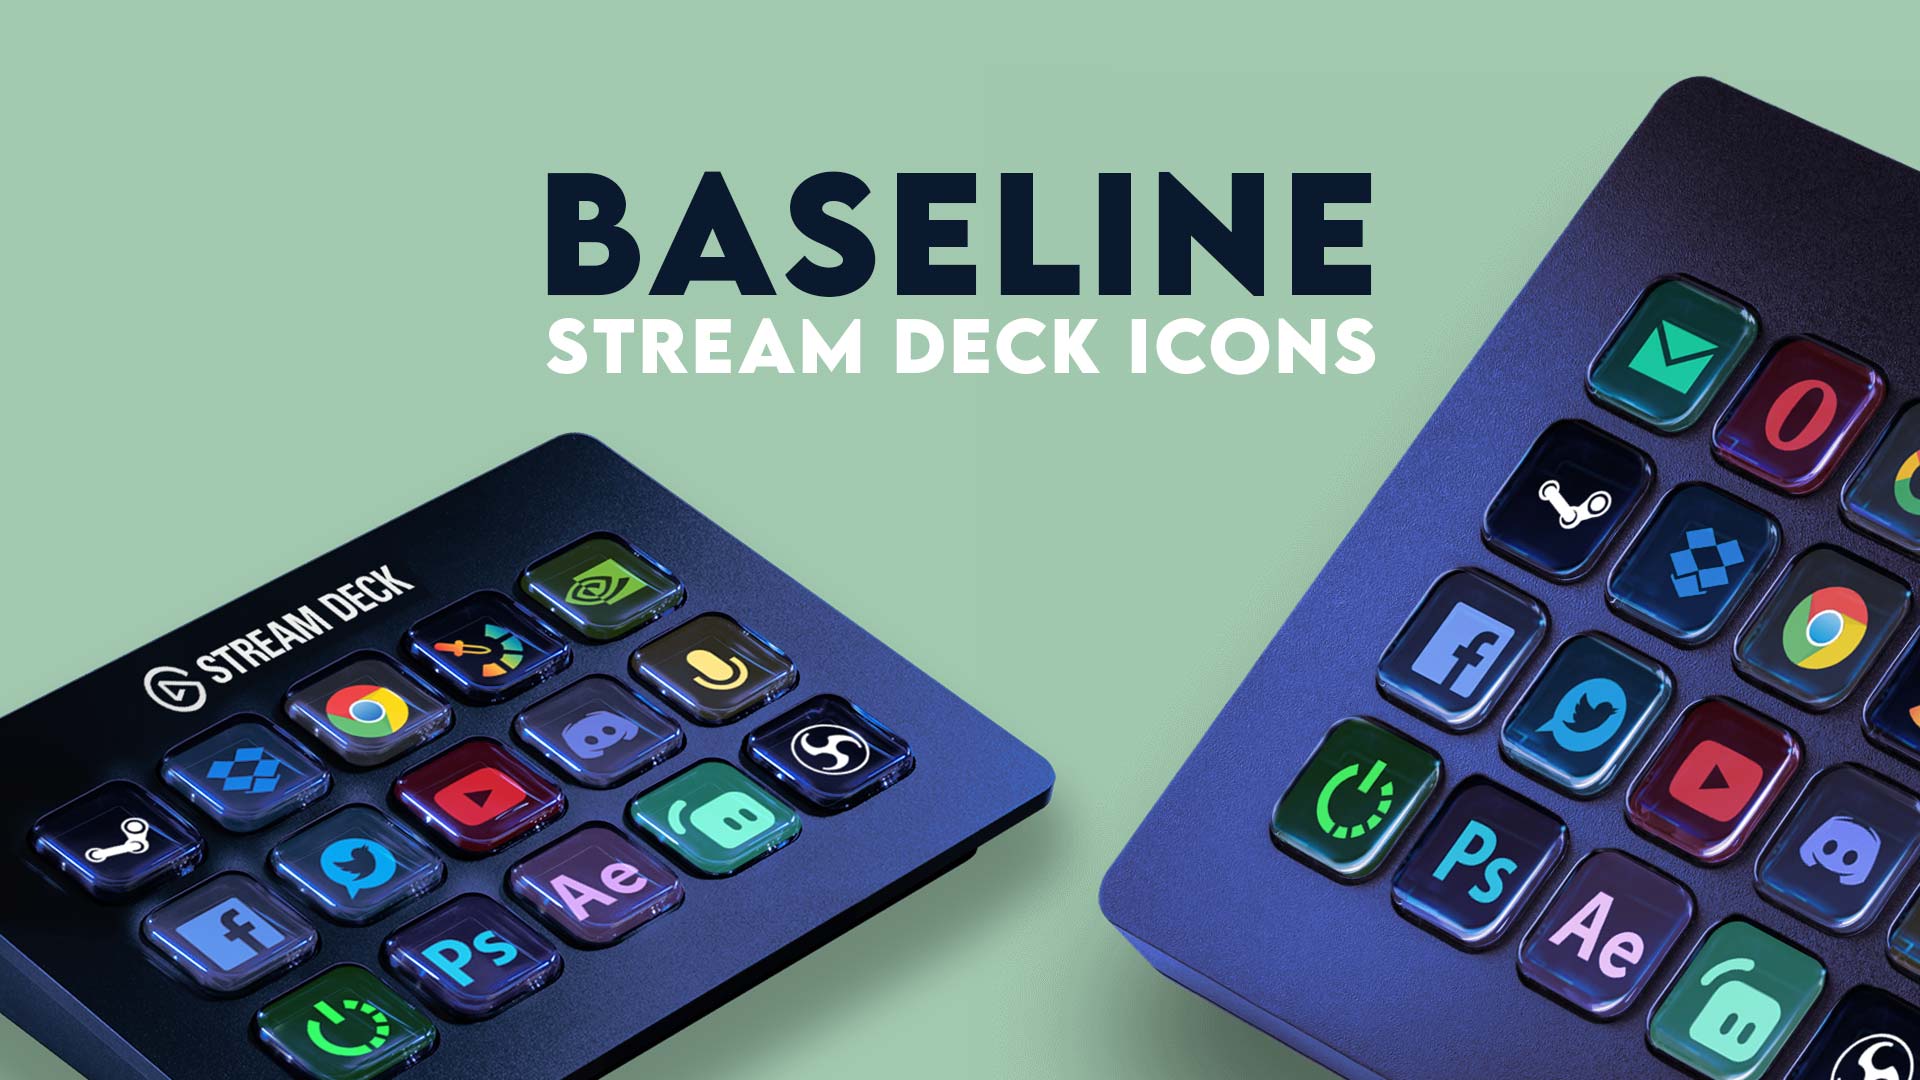 Baseline - Stream Deck and Touch Portal Key Icons - Main Image